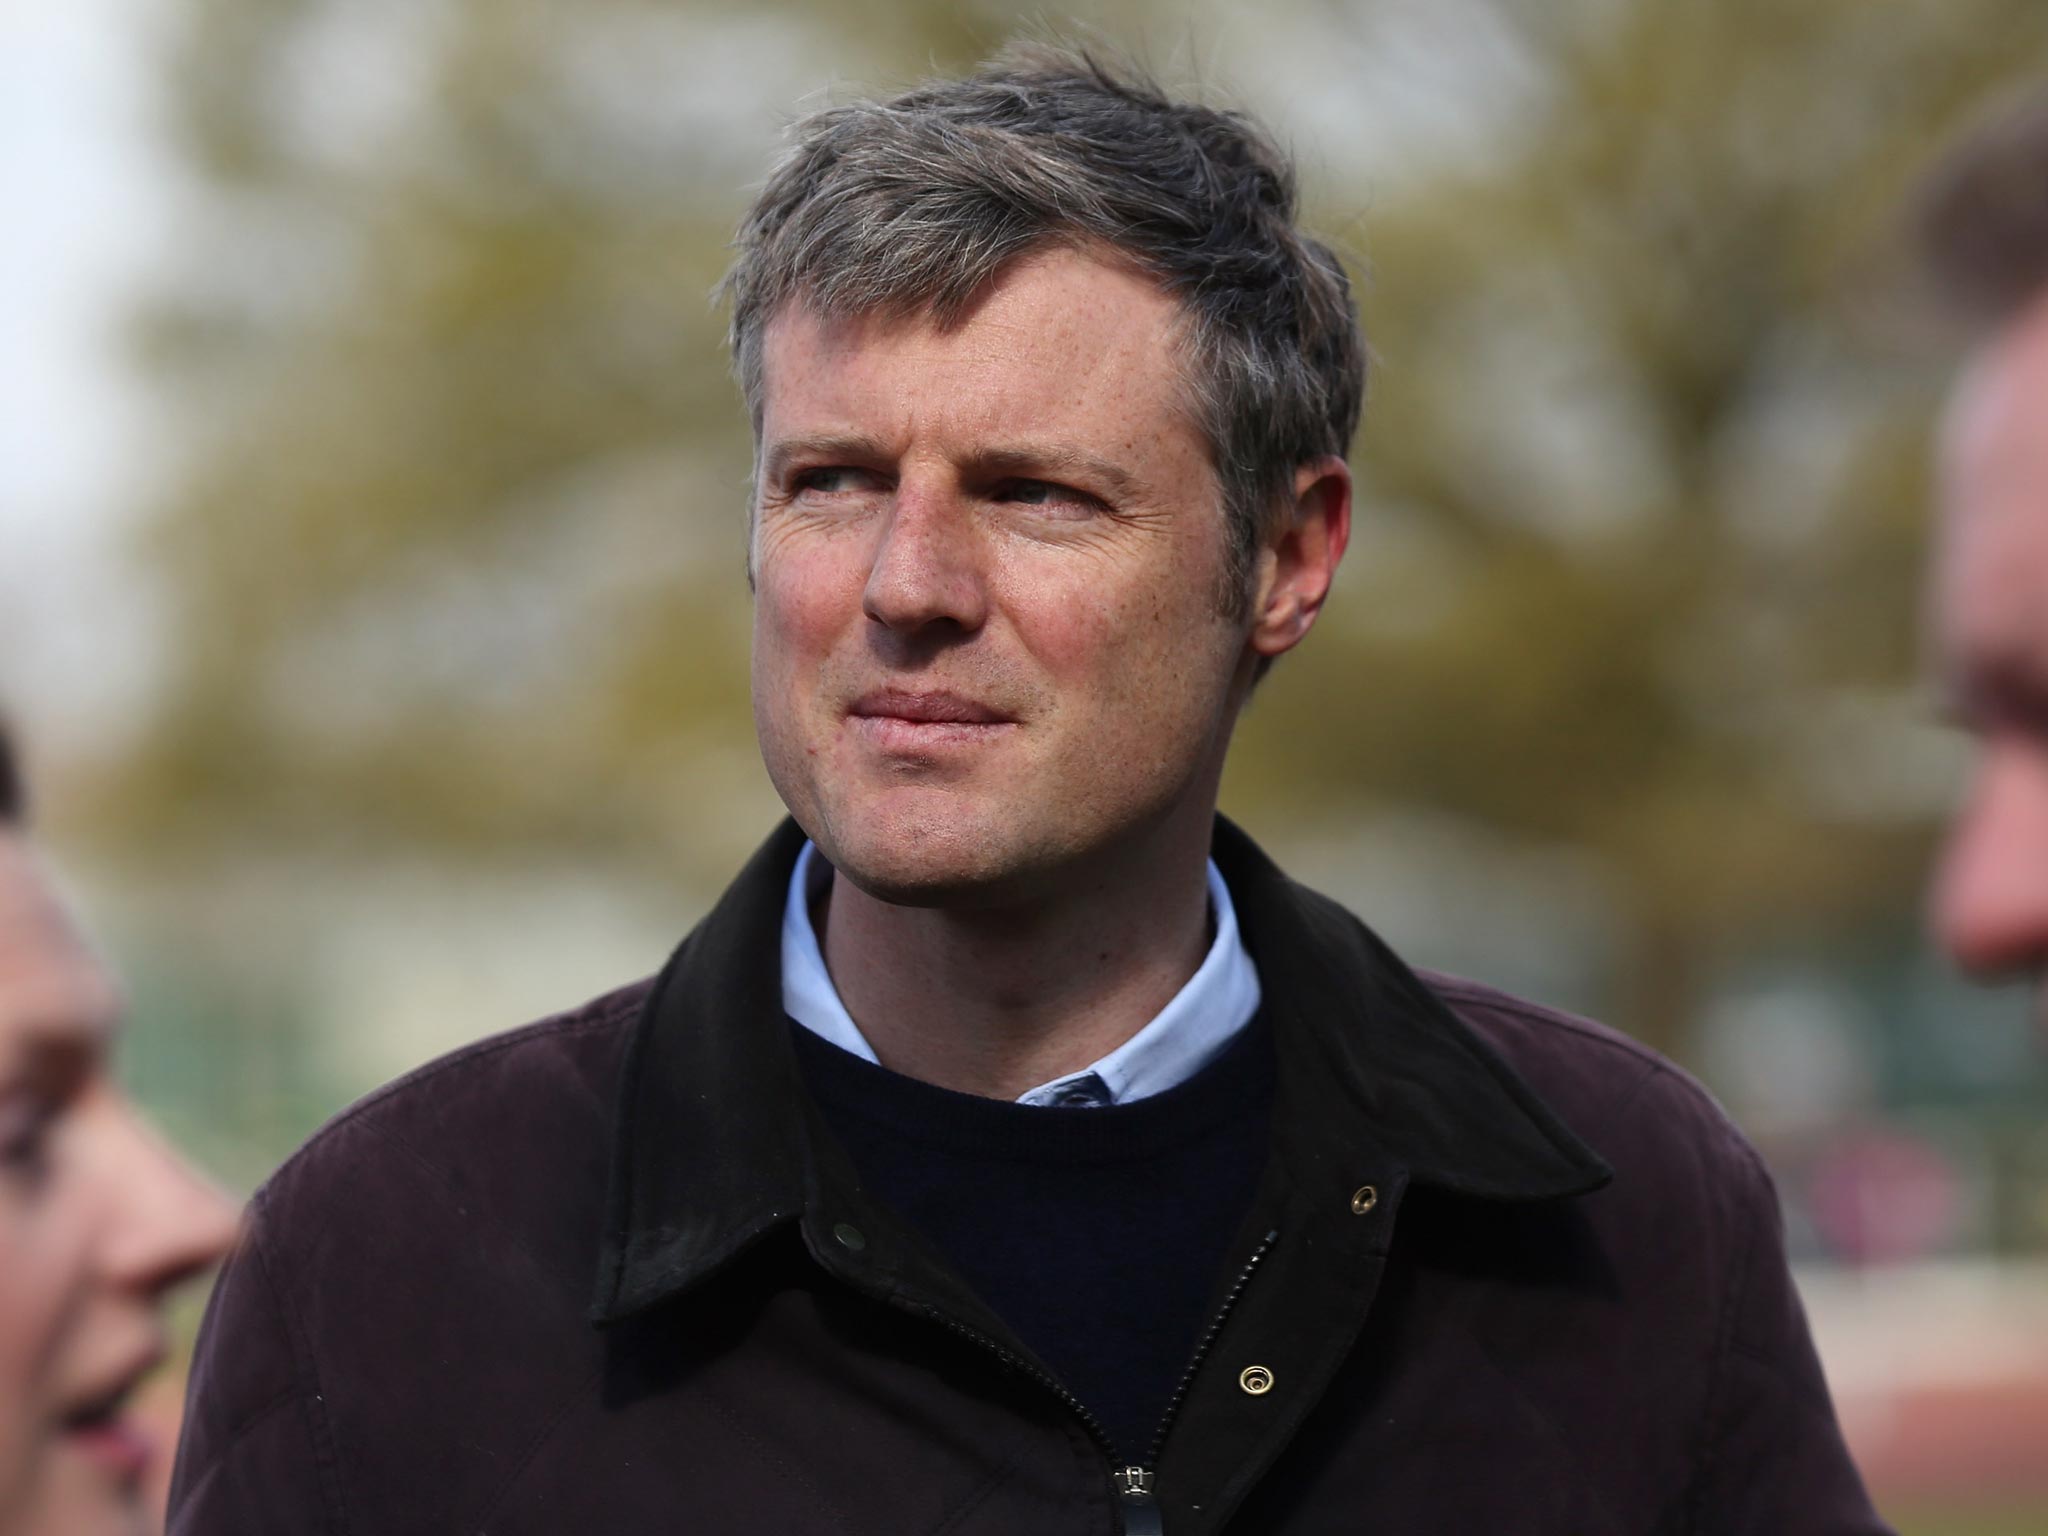 Conservative backbencher Zac Goldsmith has slammed David Cameron for dropping legislation to allow voters to remove their MPs